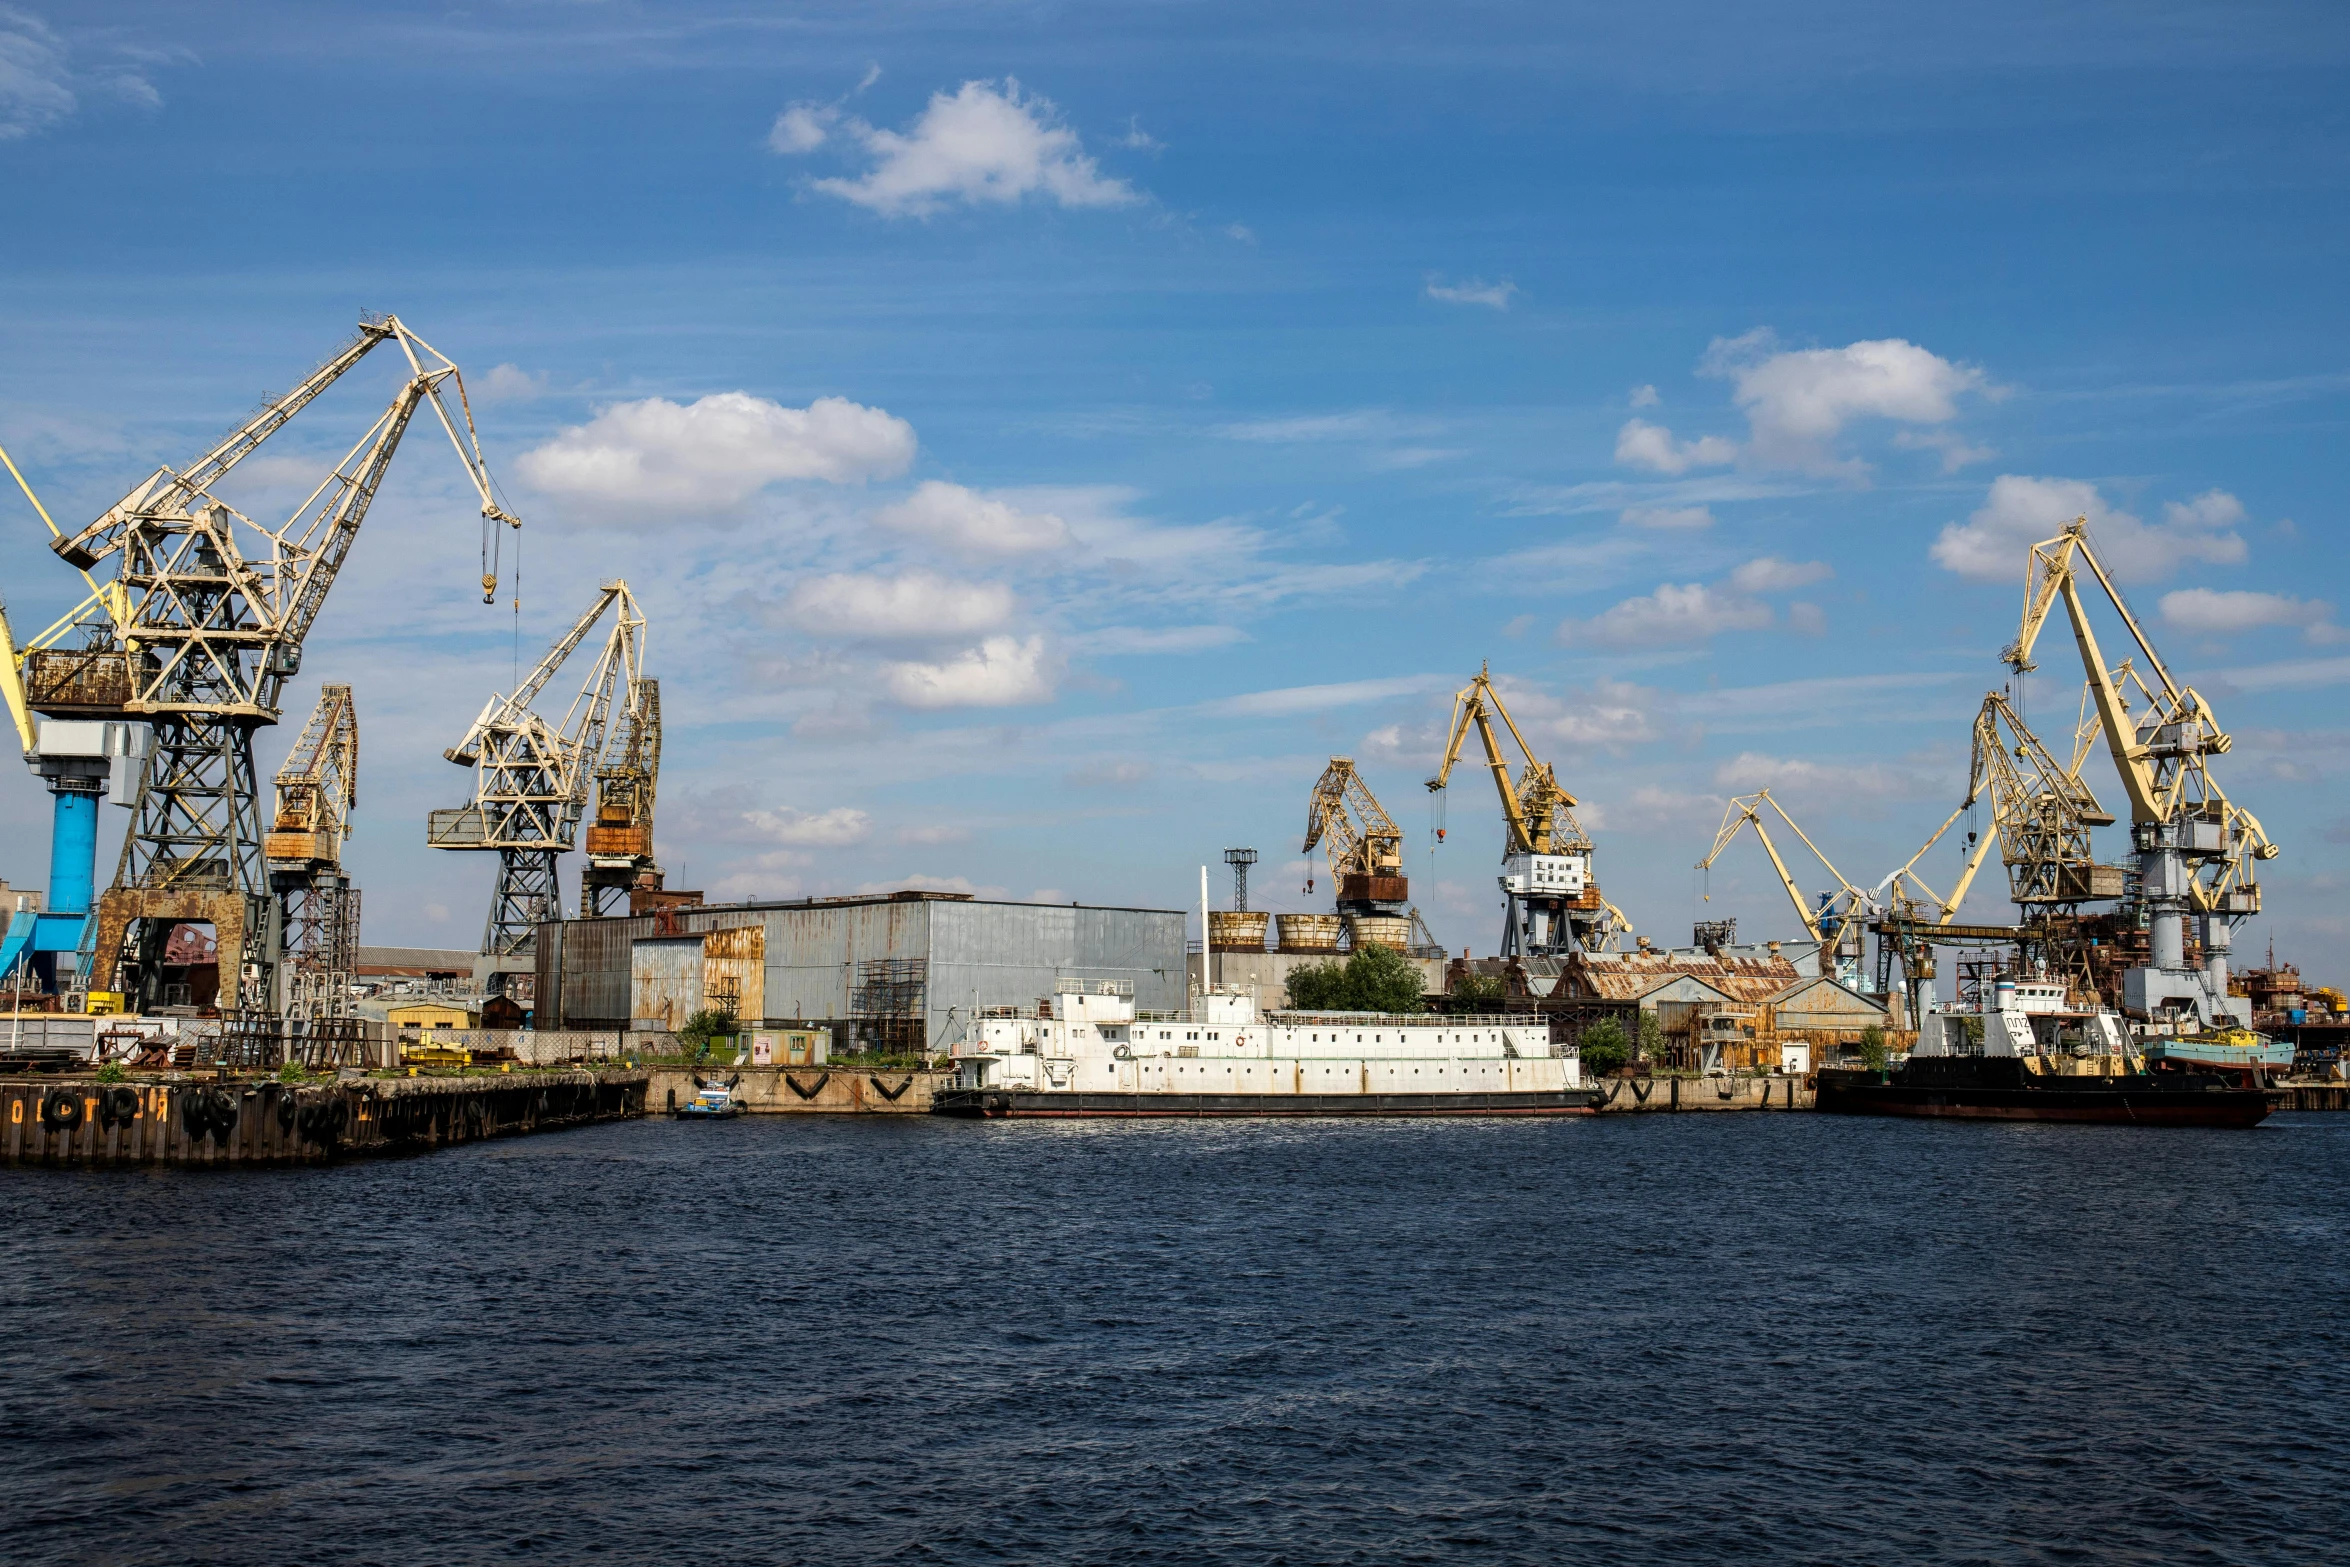 a large body of water with lots of cranes in the background, pexels contest winner, figuration libre, soviet yard, hull, sunny environment, high quality product image”